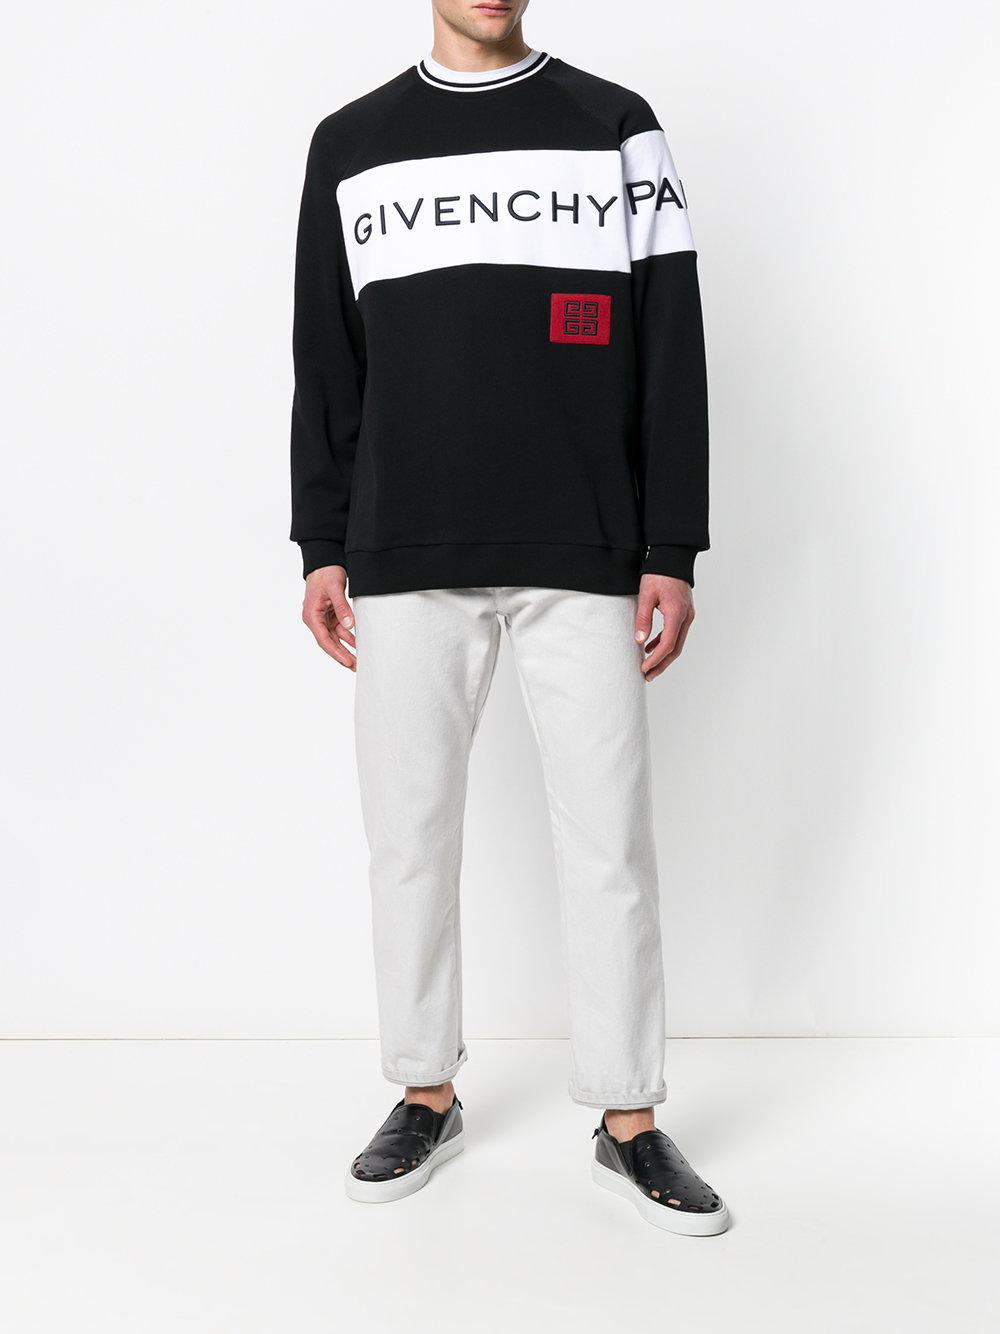 Givenchy Cotton Black And White 4g Vintage Fit Sweatshirt for Men 